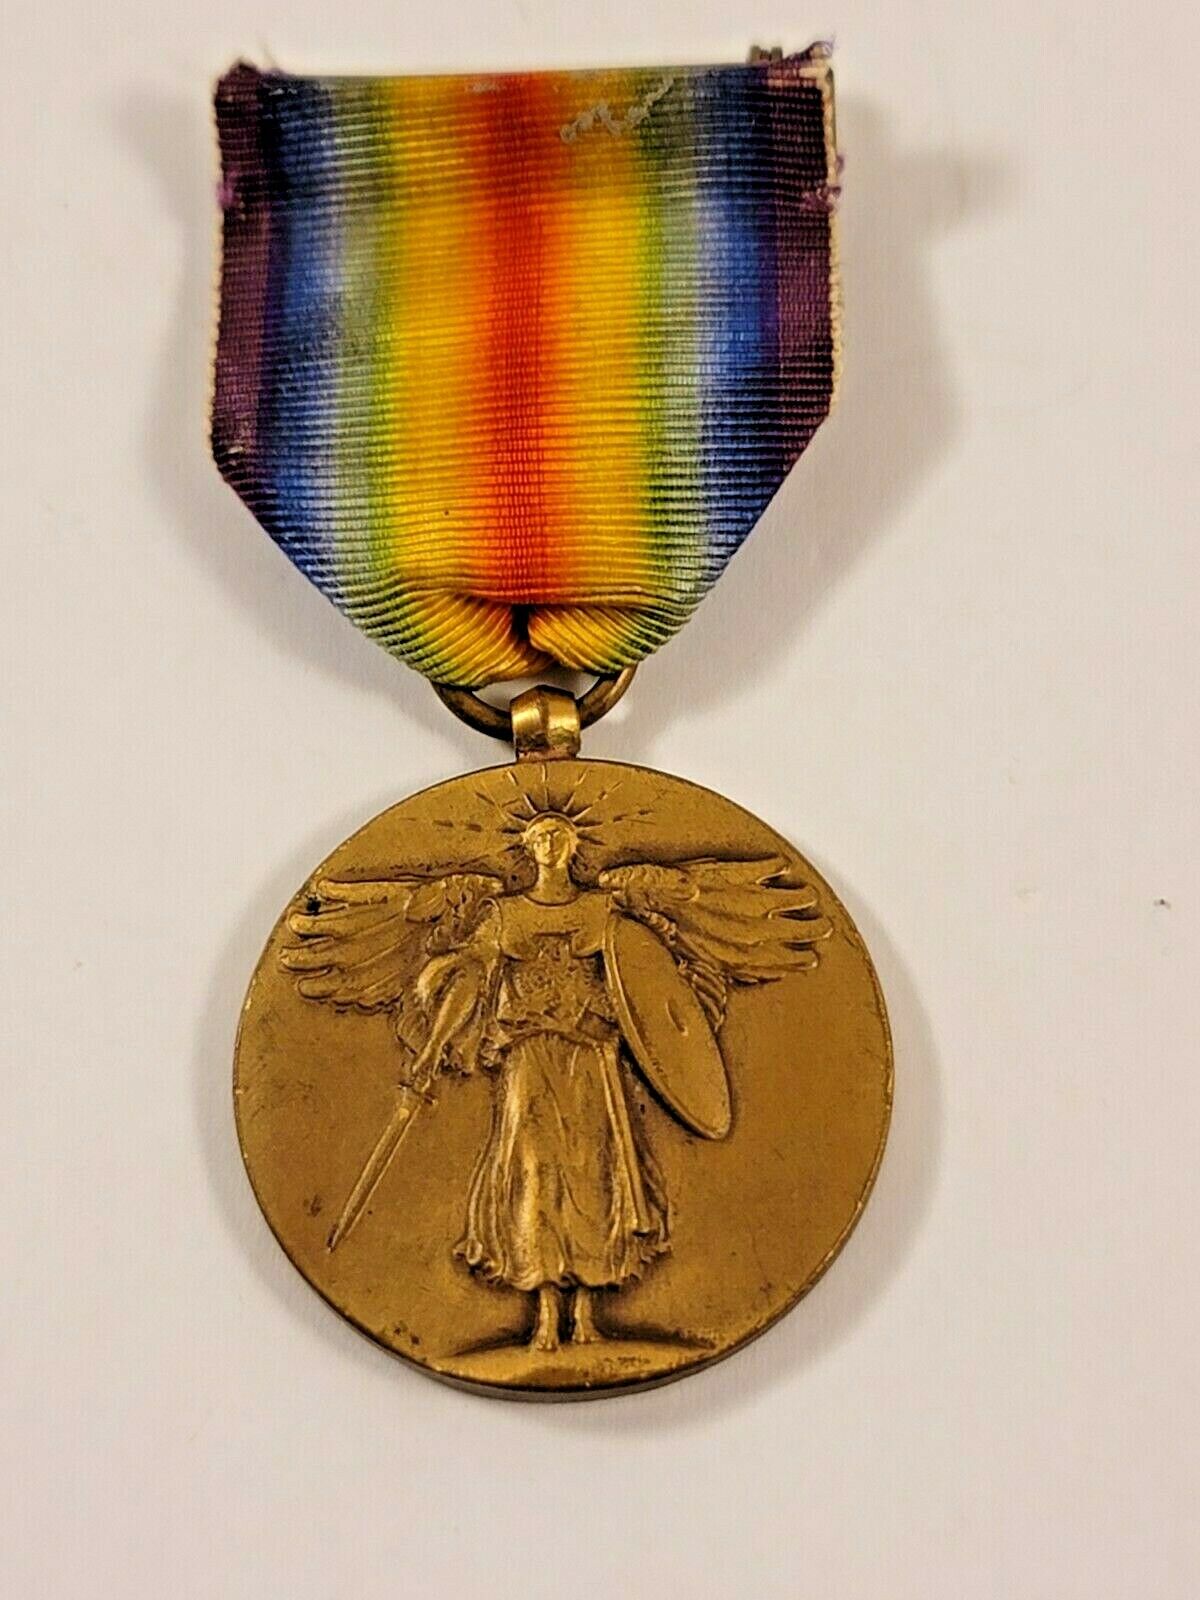 VINTAGE WWI UNITED STATES MILITARY VICTORY MEDAL